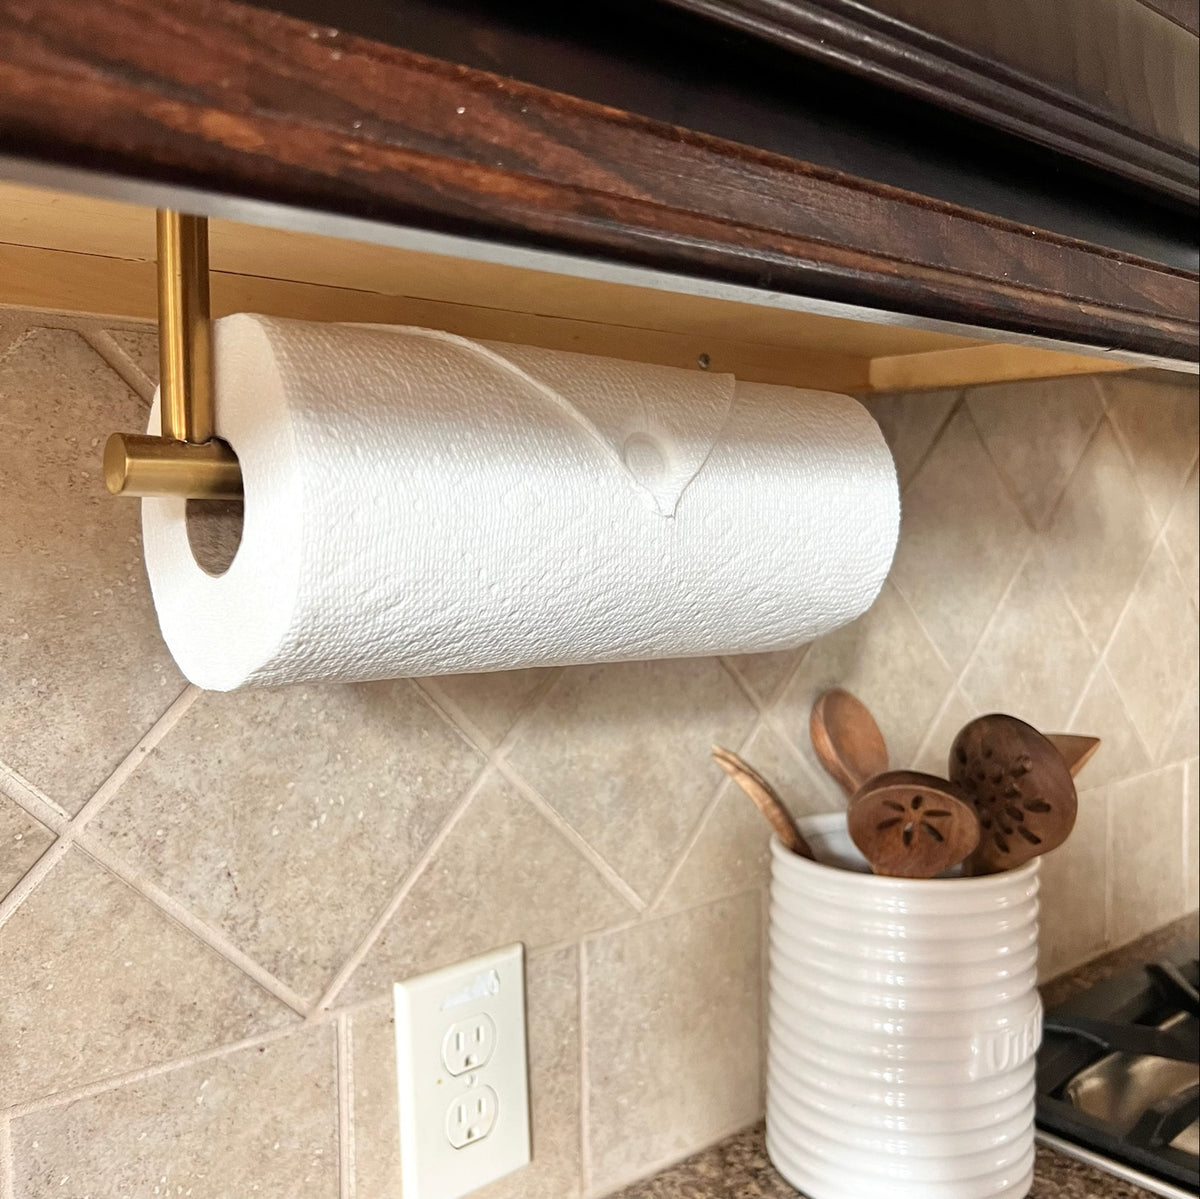 New 30cm Large Paper Towel Holder Under Cabinet Self Adhesive